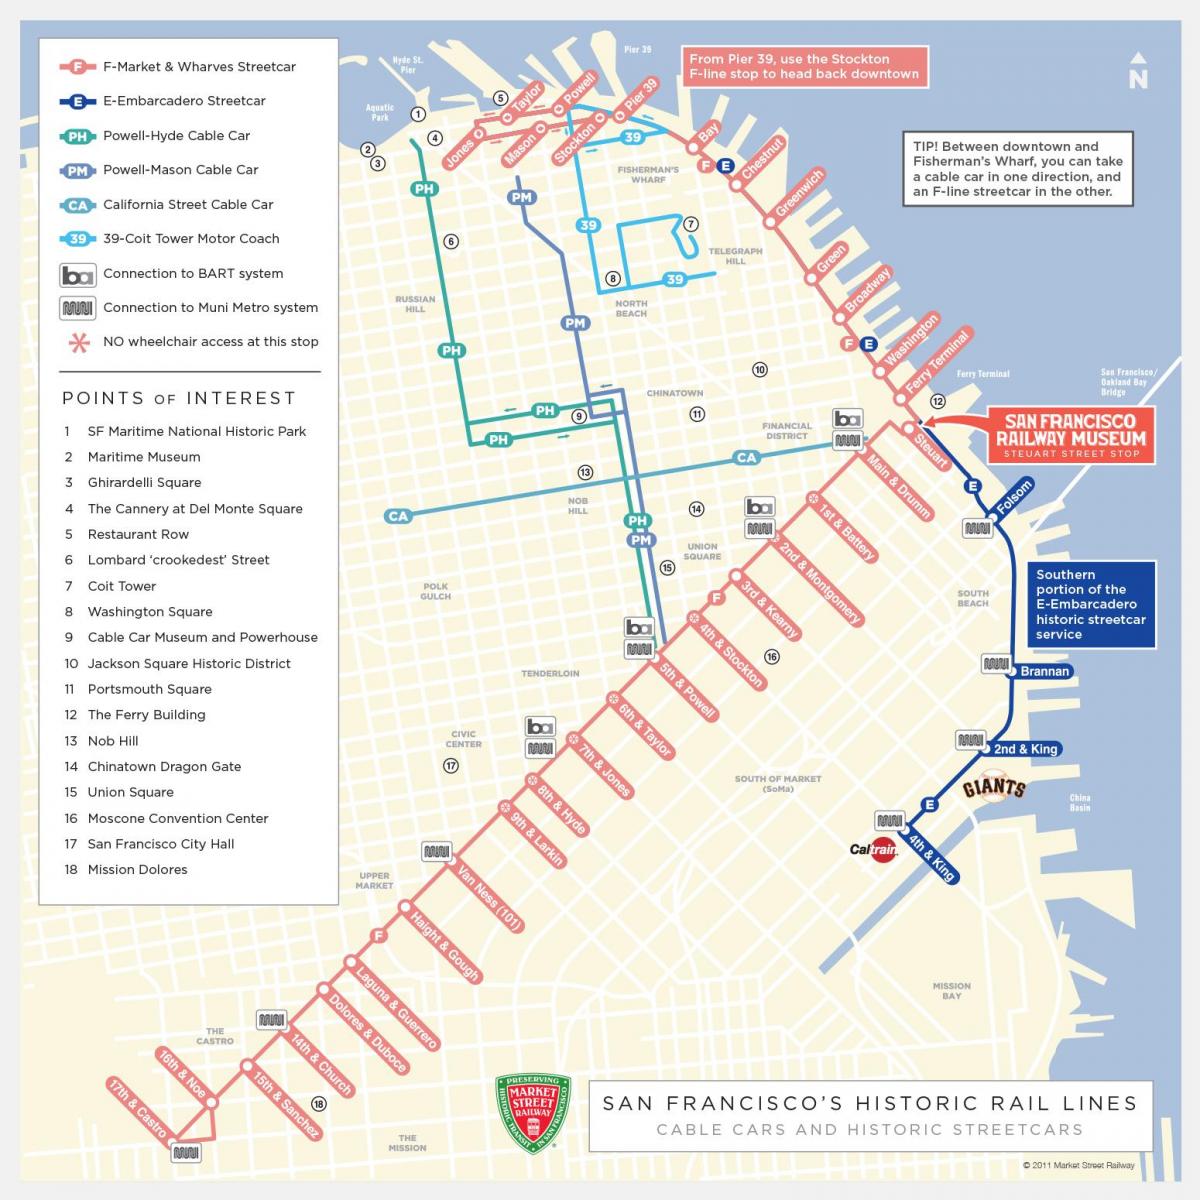 map of San Francisco trolley route